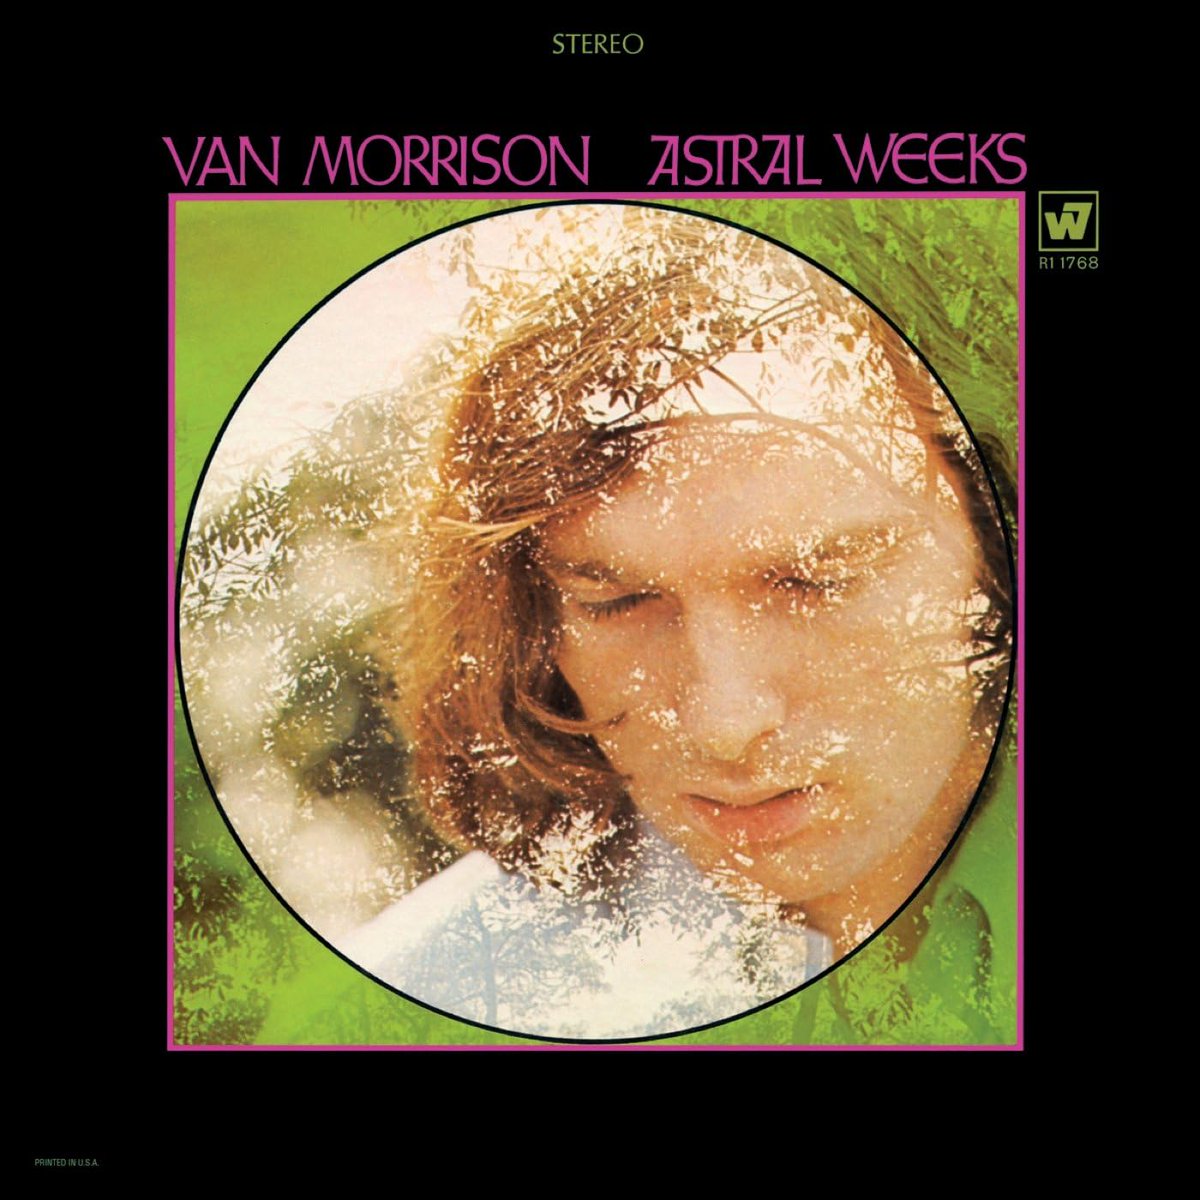 Van Morrison - Astral Weeks, 1968
  
The album's music blends folk, blues, jazz, and classical styles, signalling a radical departure from the sound of Morrison's previous pop hits. 
His lyrics have been described as impressionistic, hypnotic, and modernist. 

#VanMorrison